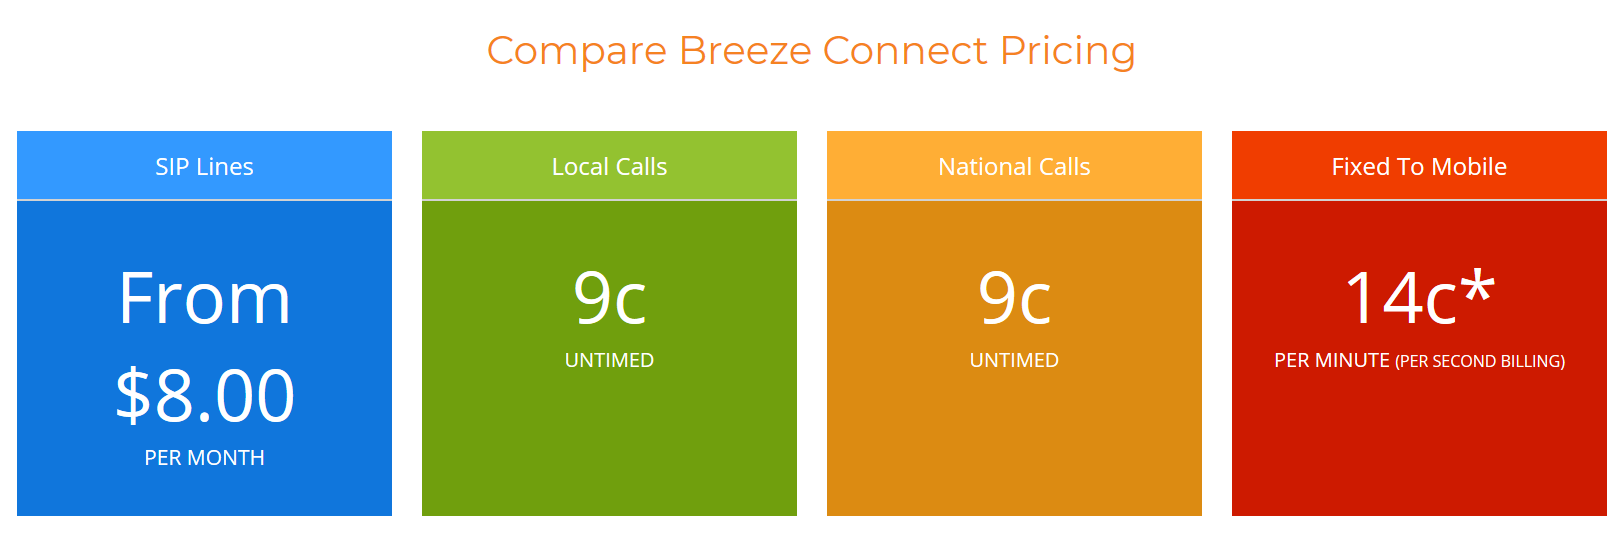 BreezeConnect Pricing